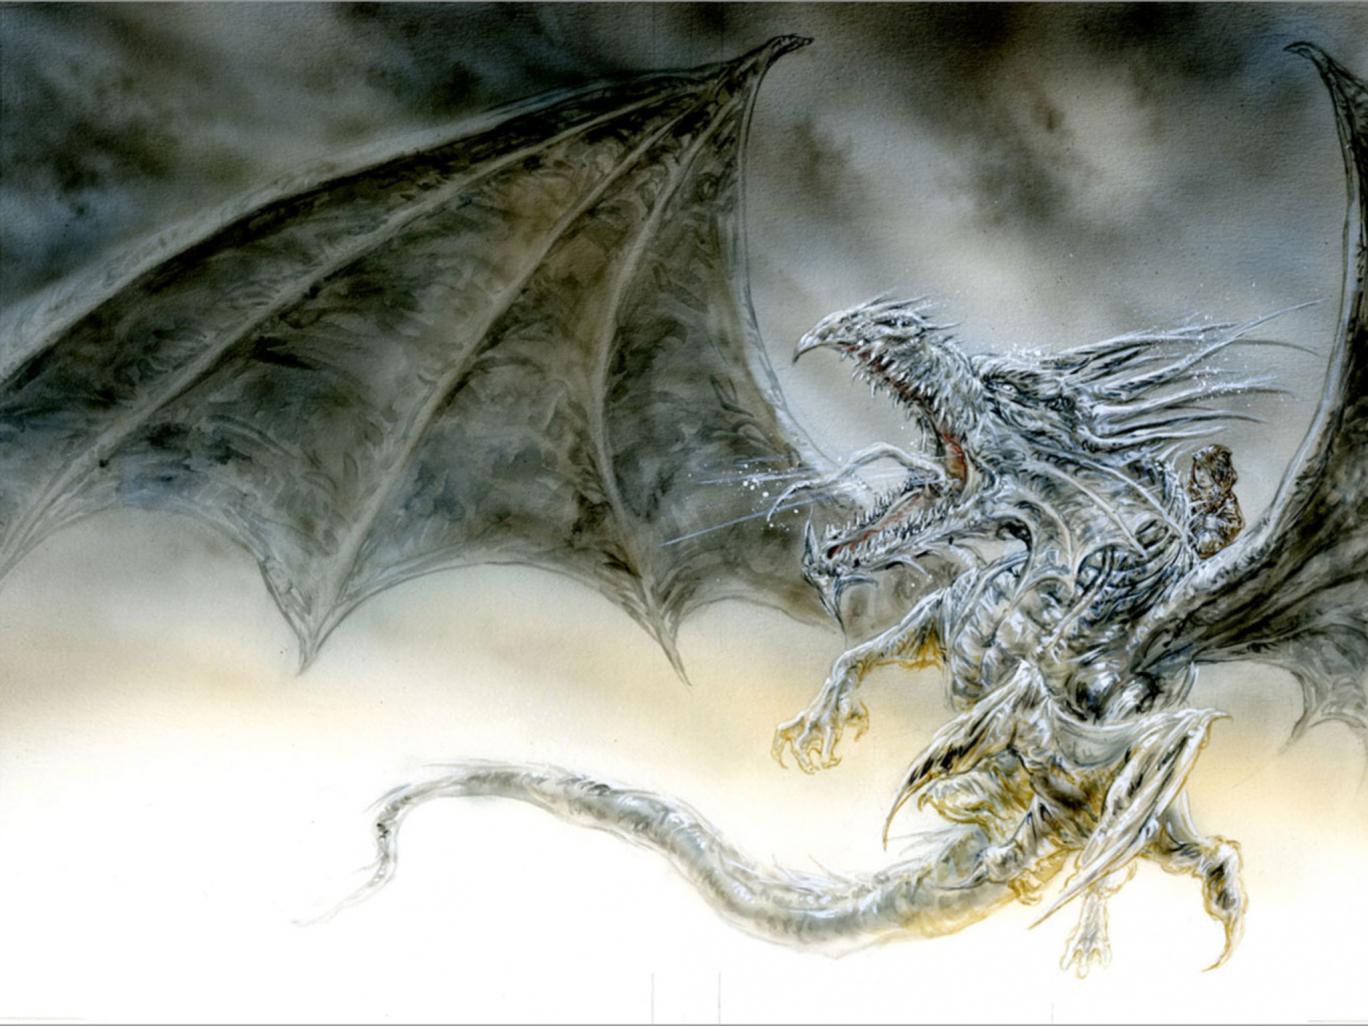 Luis Royo's version of George RR Martin's "The Ice Dragon"